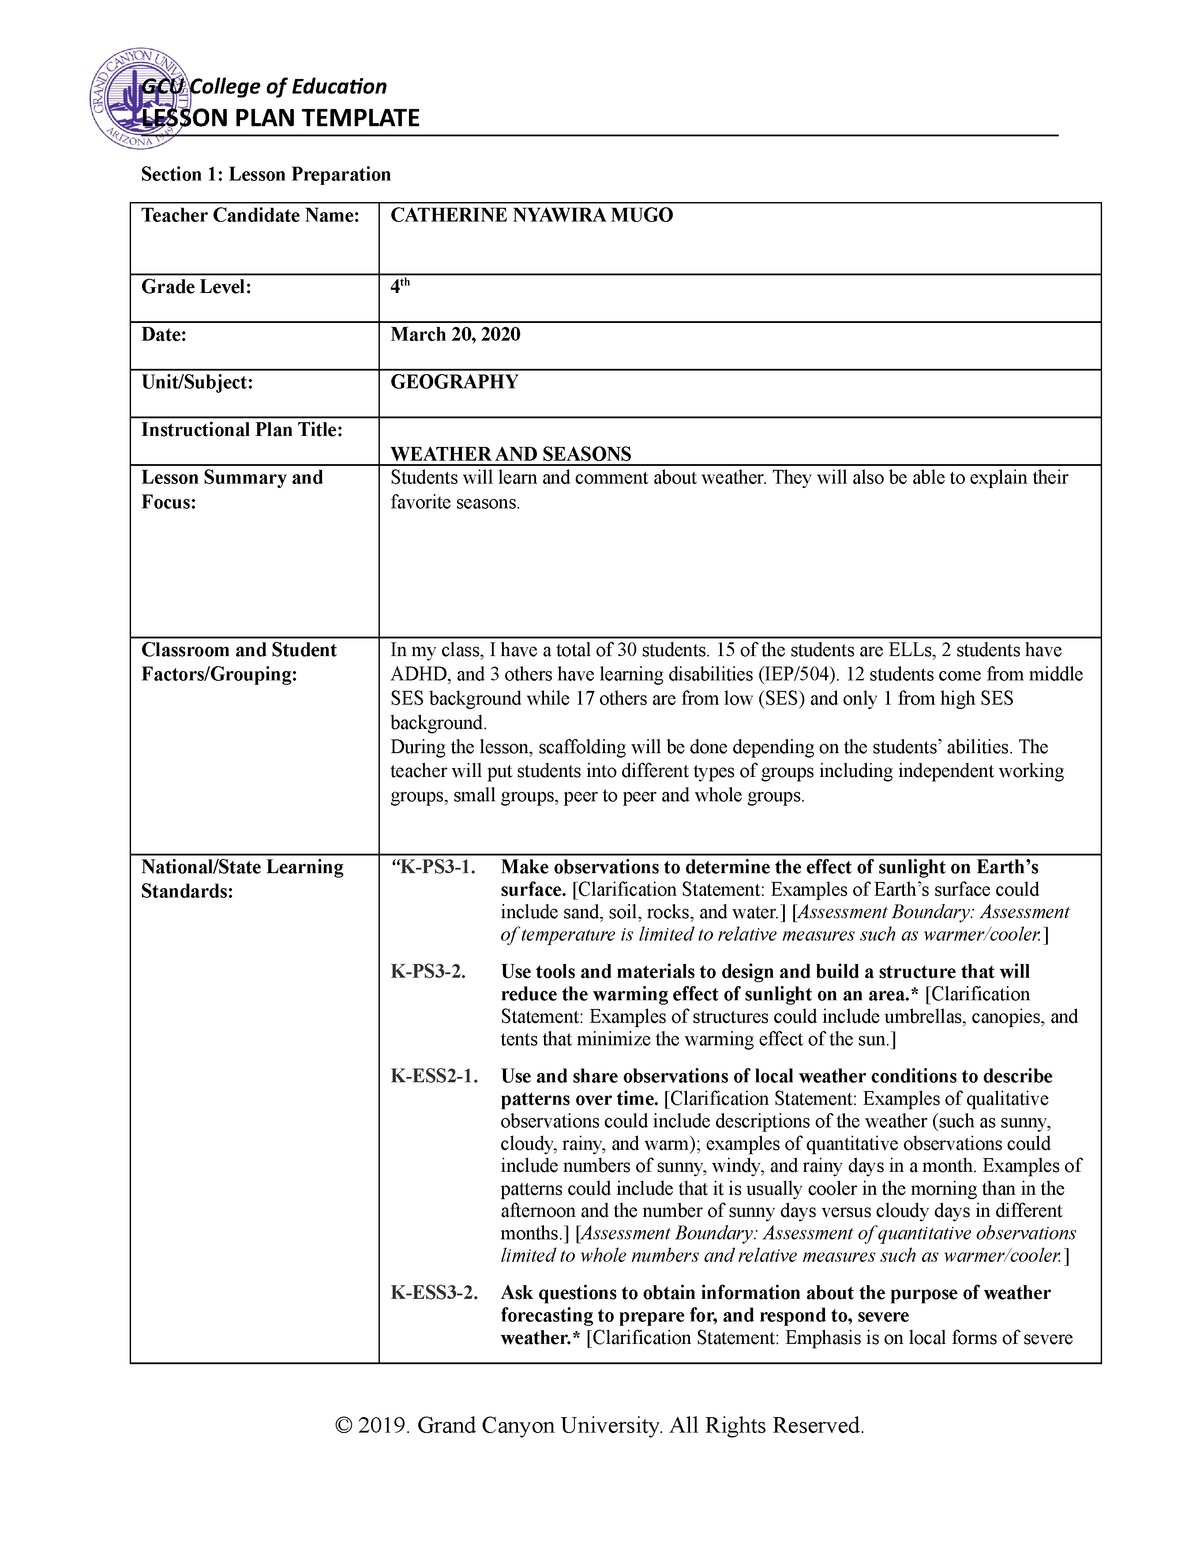 guided-reading-lesson-plan-template-4th-grade-plans-learning-typical